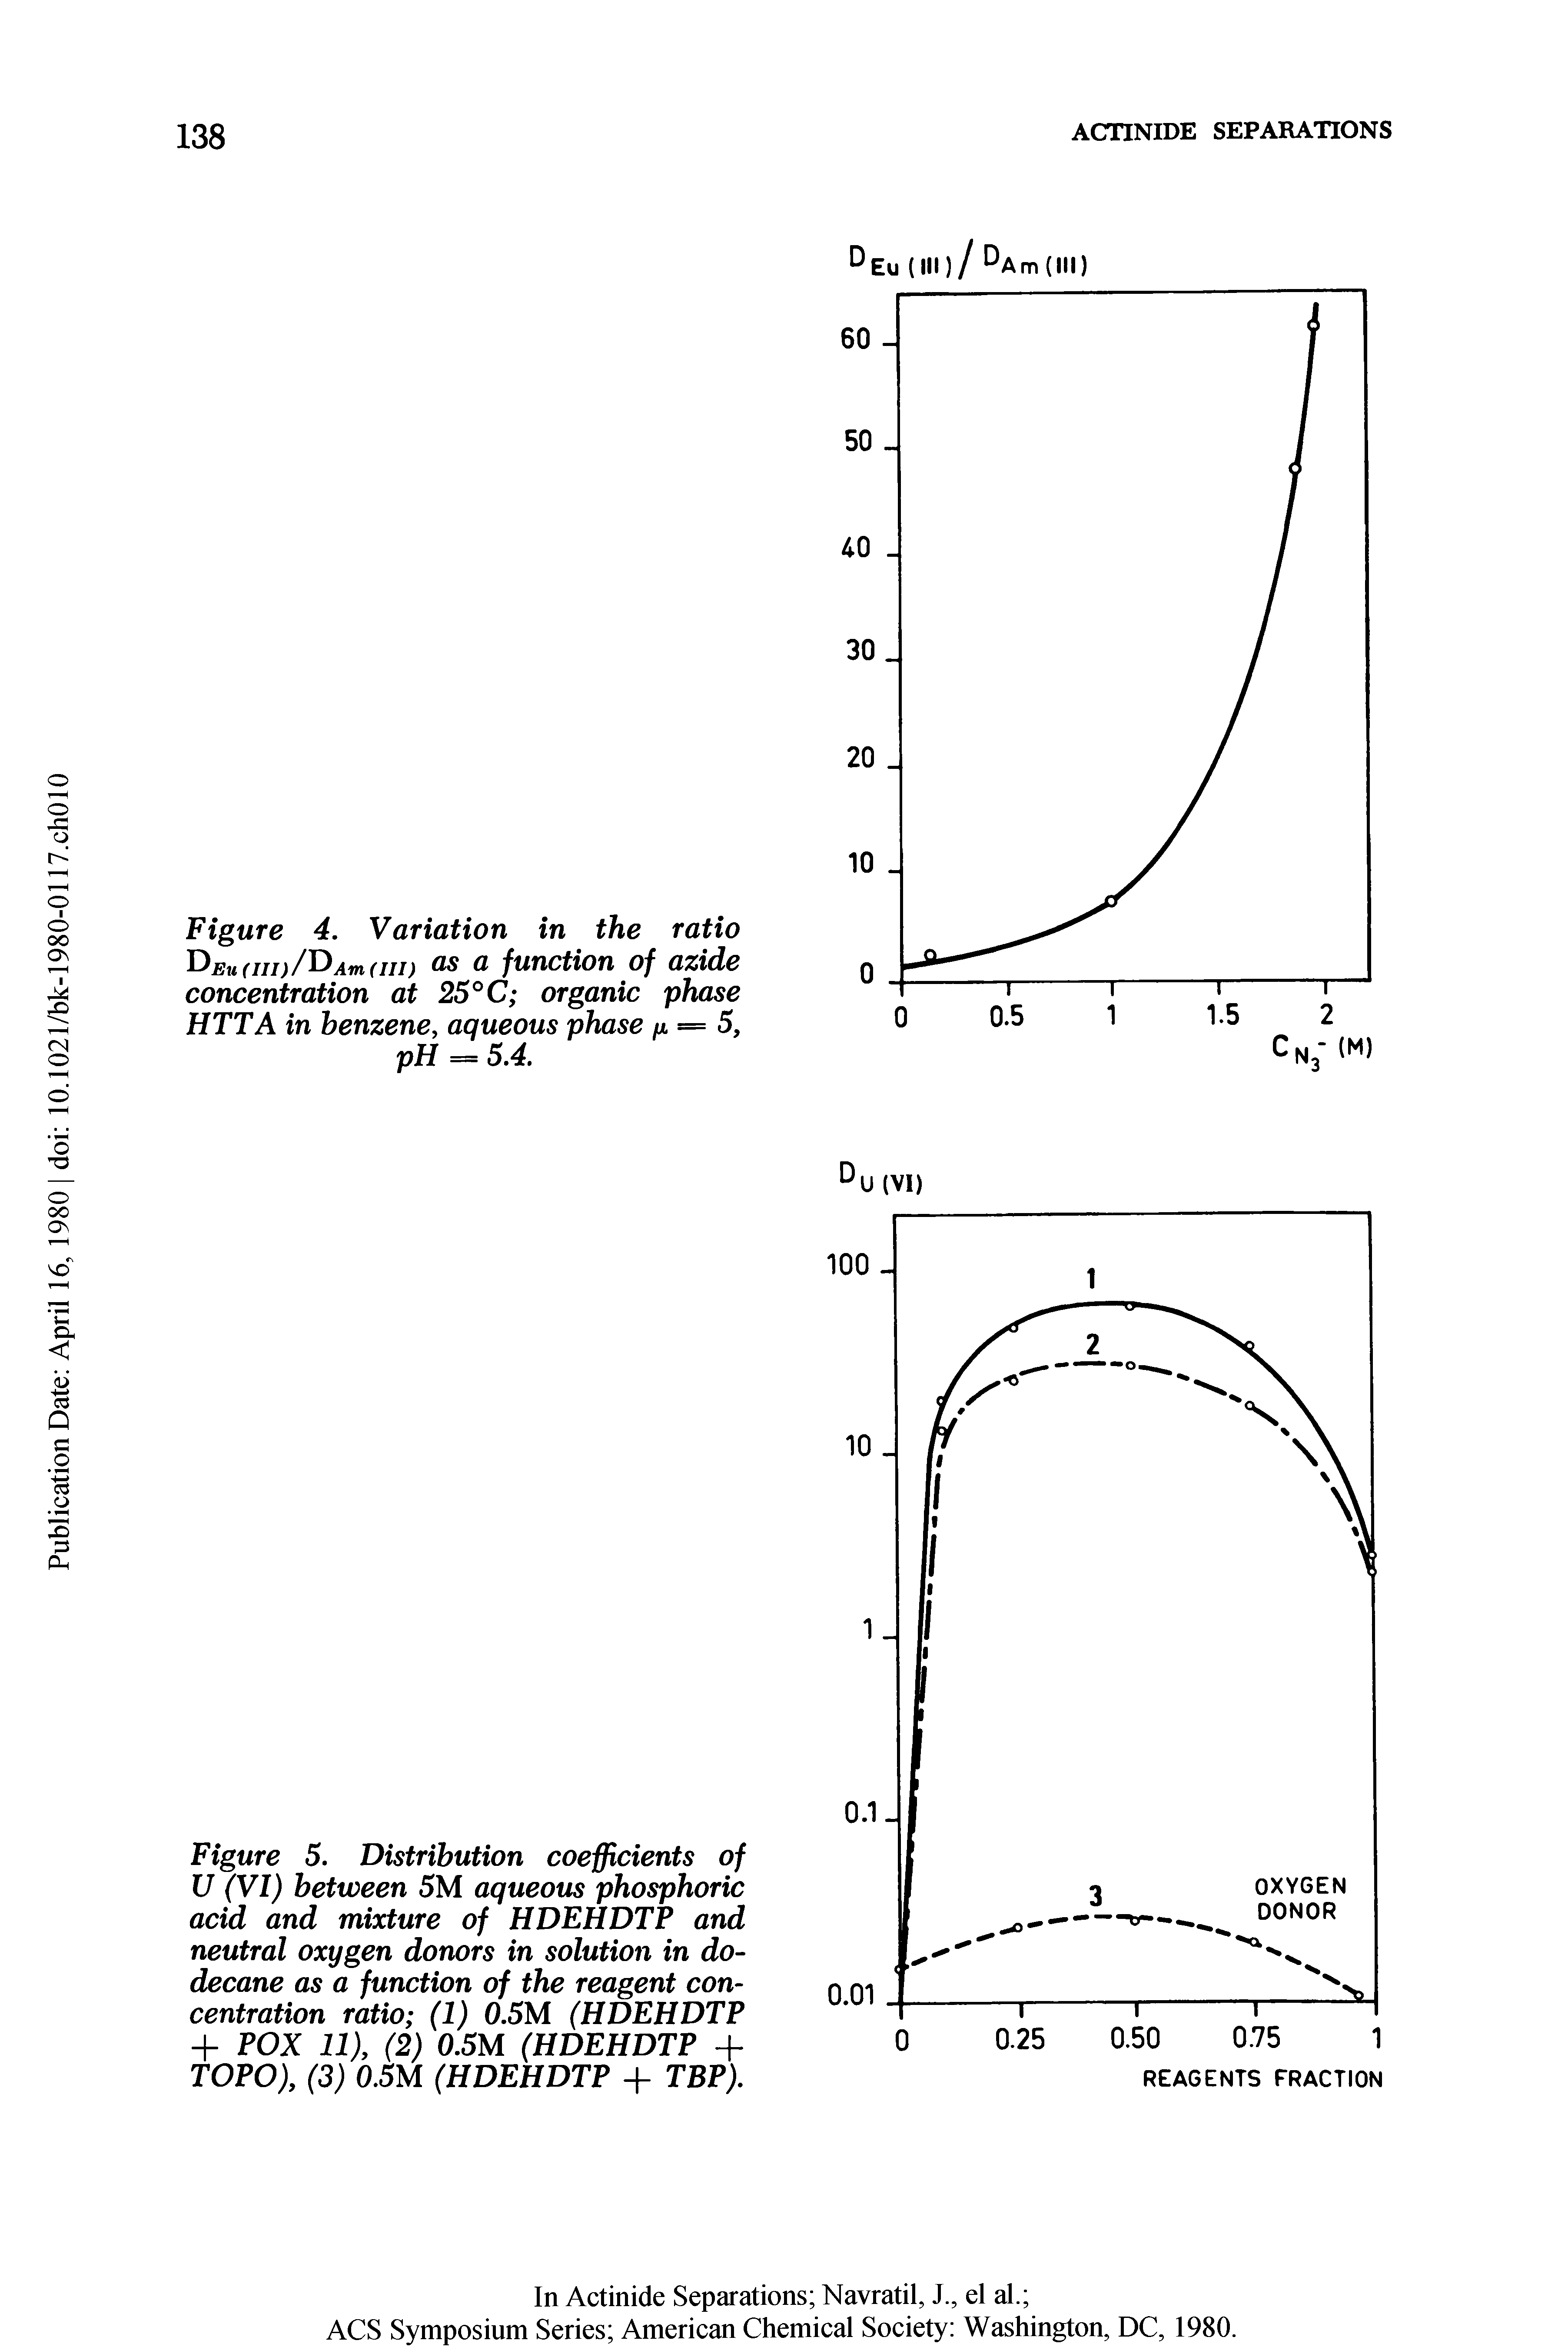 Figure 5. Distribution coefficients of U (VI) between 5M aqueous phosphoric acid and mixture of HDEHDTP and neutral oxygen donors in solution in do-decane as a function of the reagent concentration ratio (1) 0.5M (HDEHDTP + POX 11), (2) 0.5M (HDEHDTP + TOPO), (3) 0.5M (HDEHDTP + TBP).